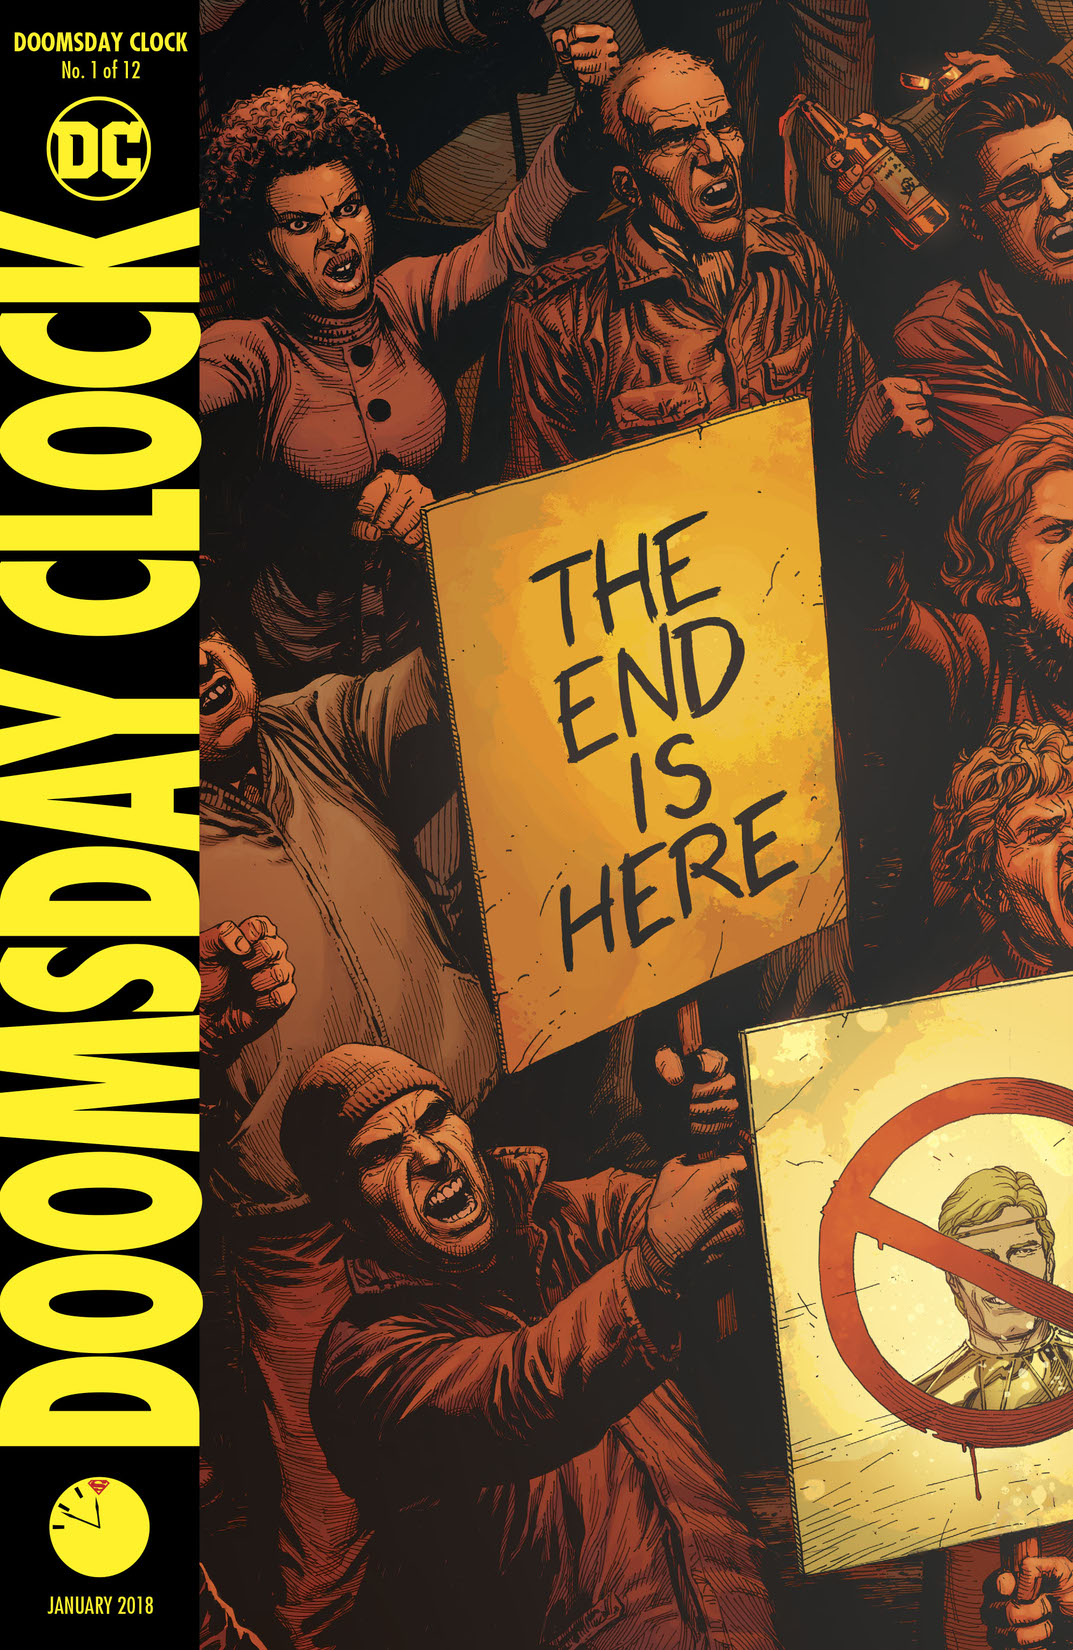 Doomsday Clock #1 preview images